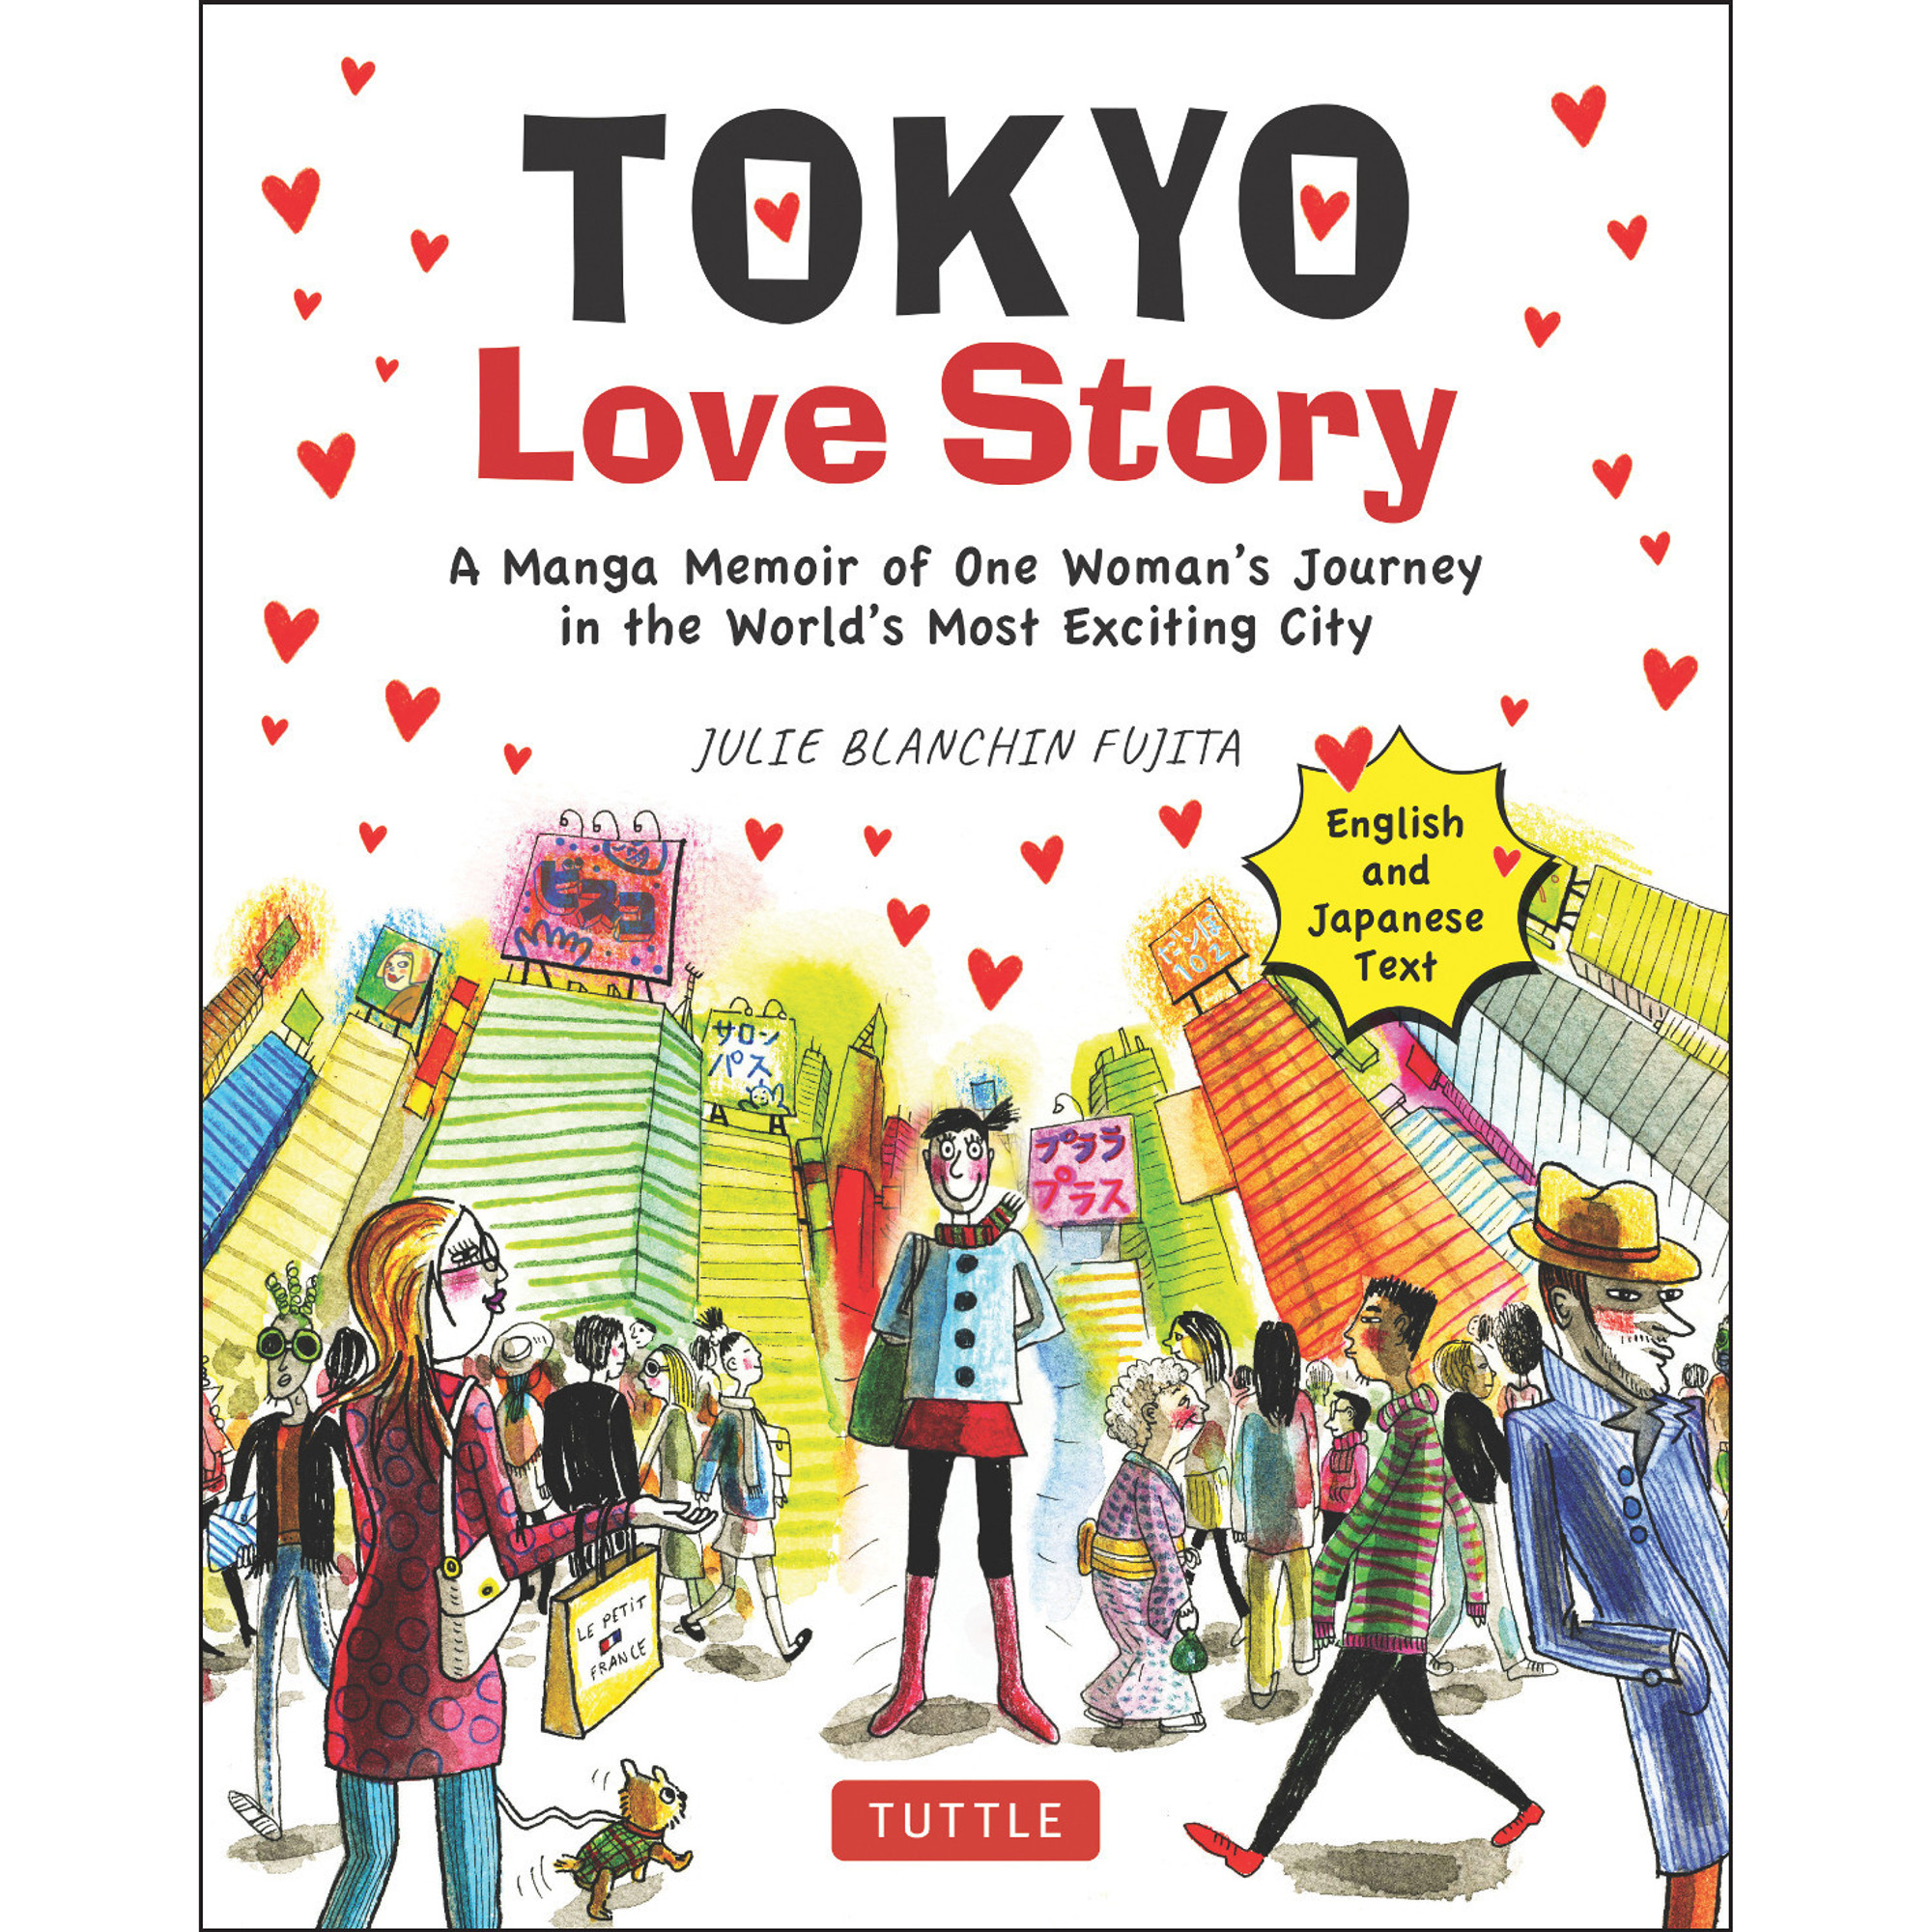 christina pita recommends japanese love story 256 pic